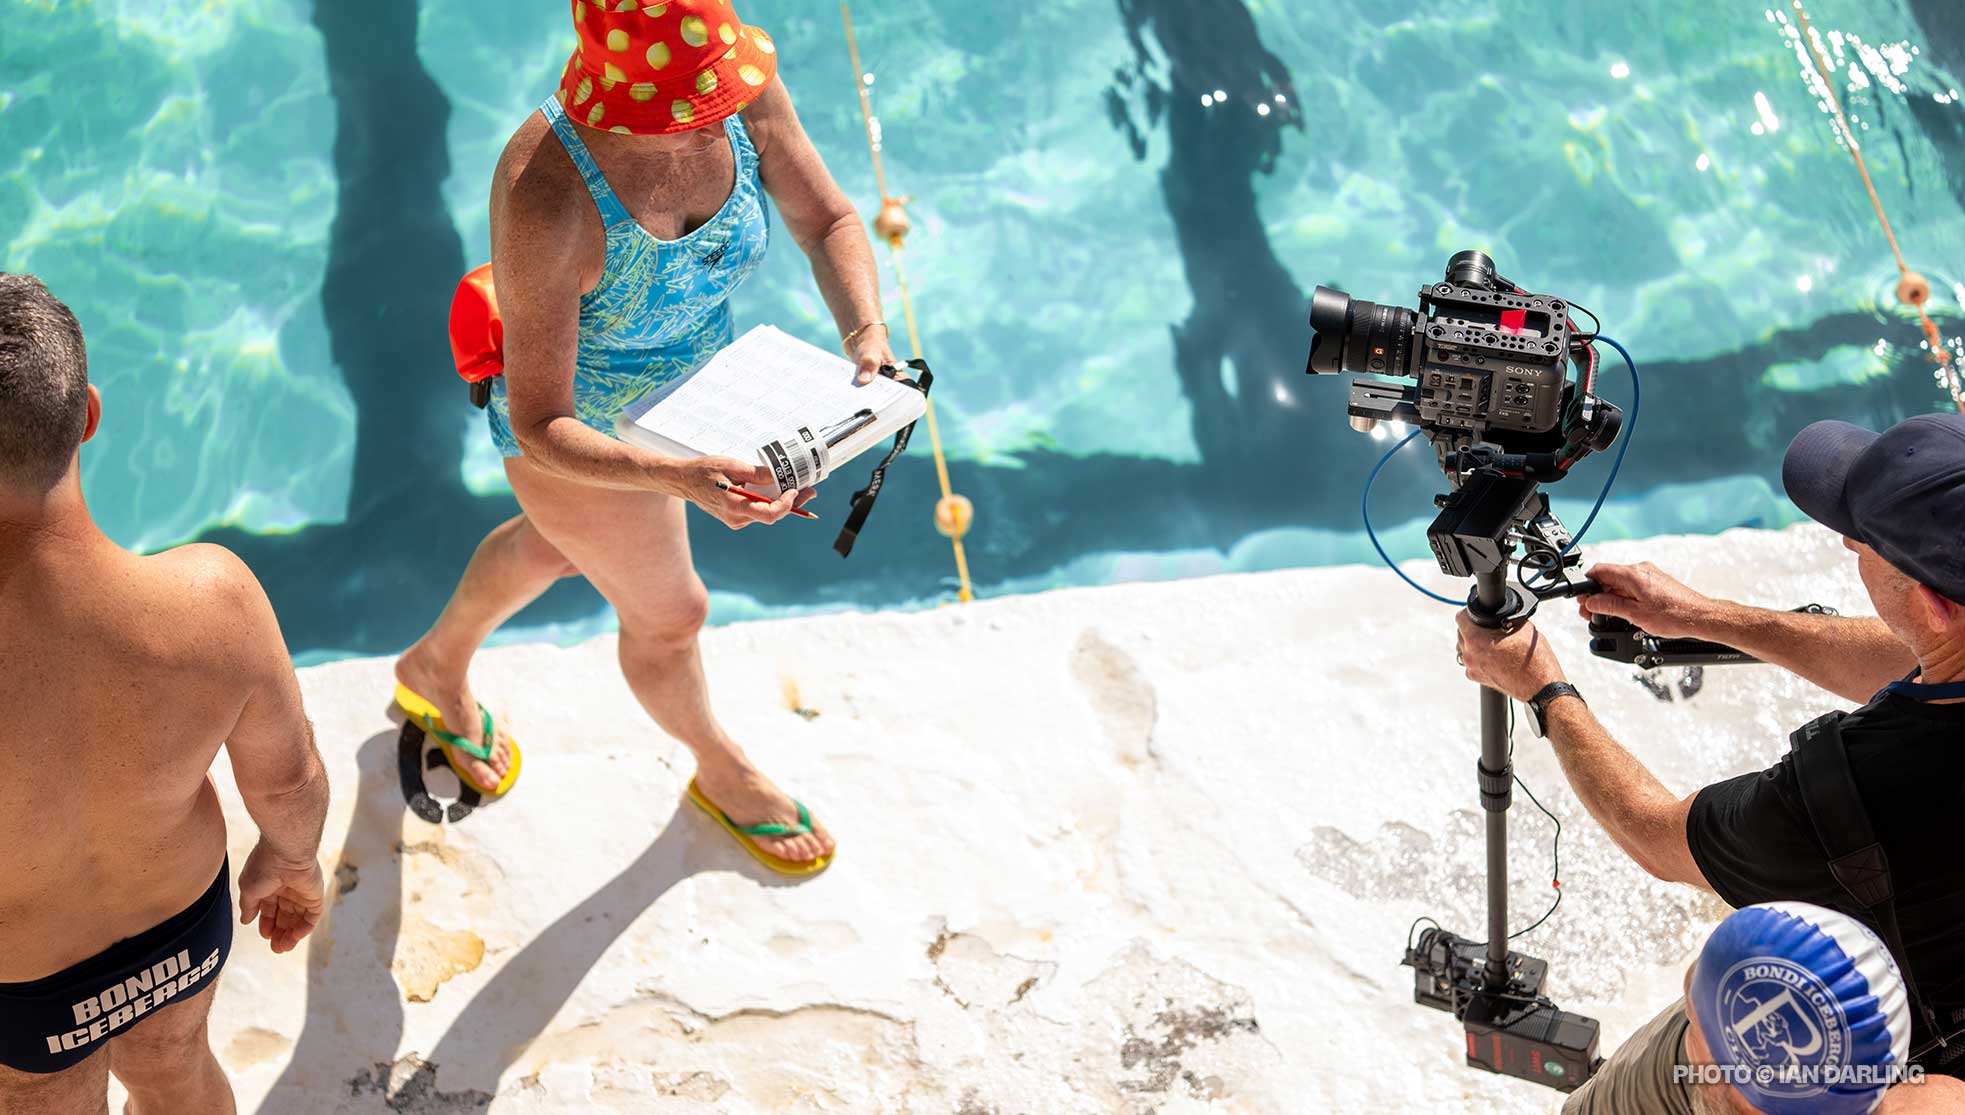 Filming a woman and clipboard, poolside